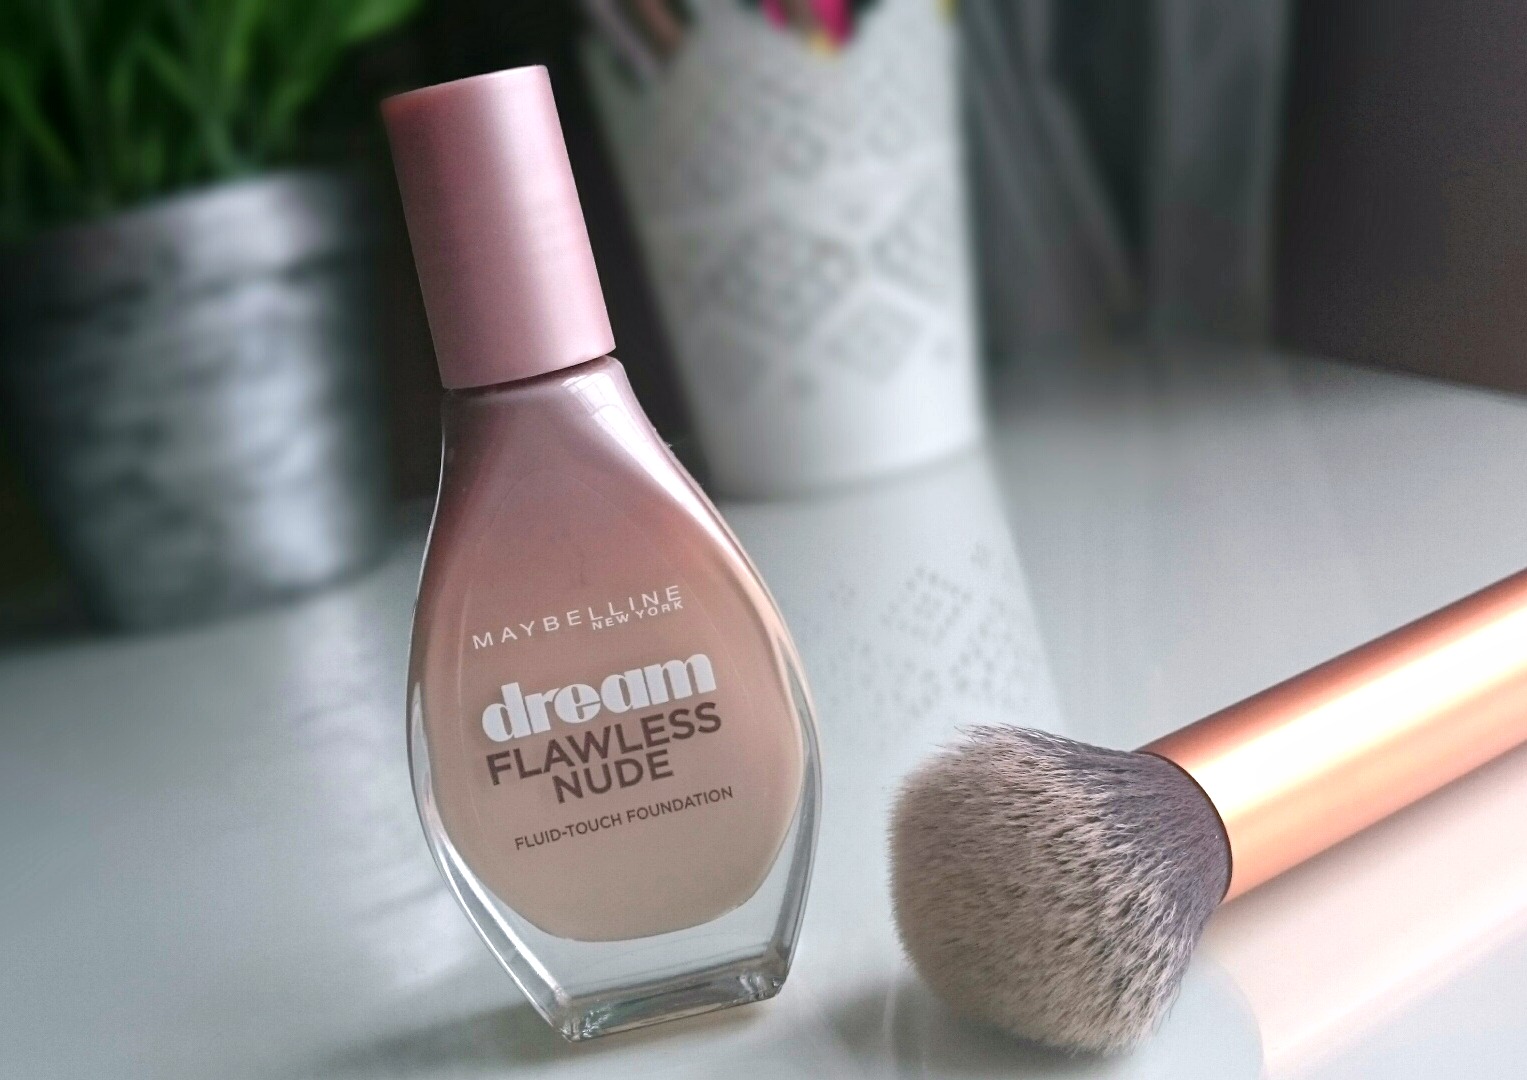 Maybelline Dream Flawless Nude foundation